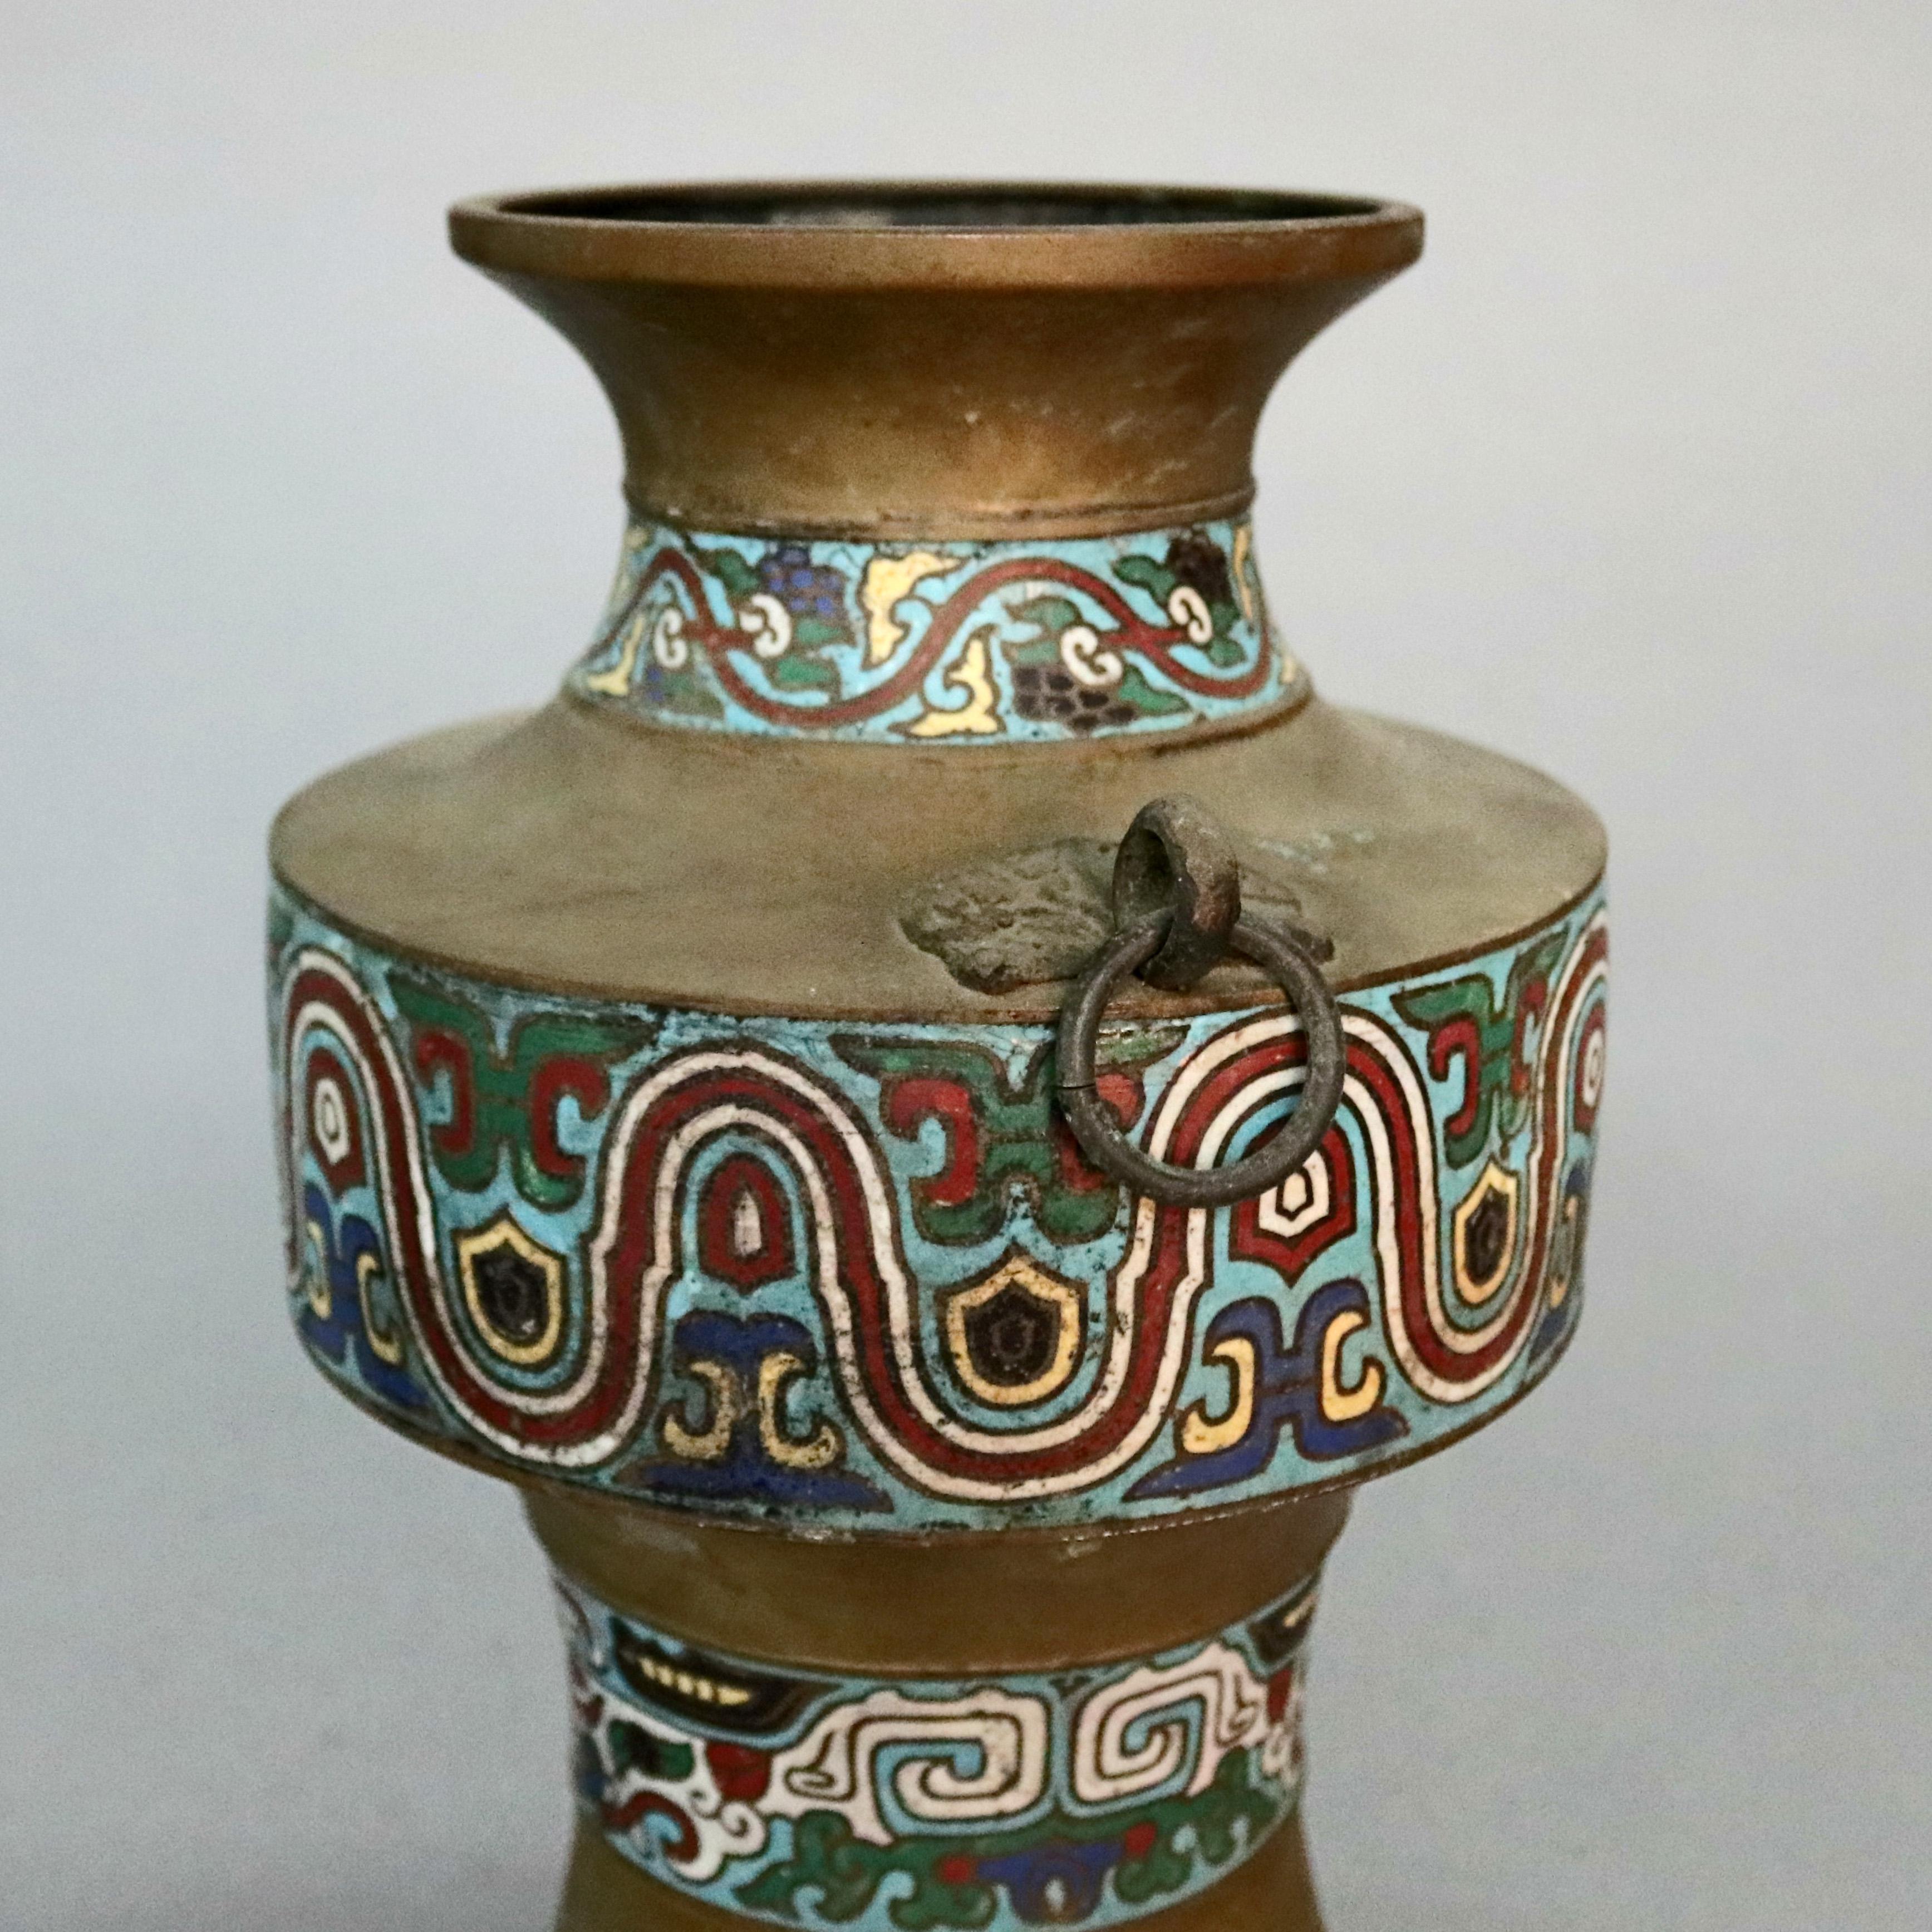 An antique Chinese cloisonné vase offers bronze vessel having bands of hand enameled repeating geometric stylized foliate patterns and flanking ring handles, circa 1920.

Measures: 11.75